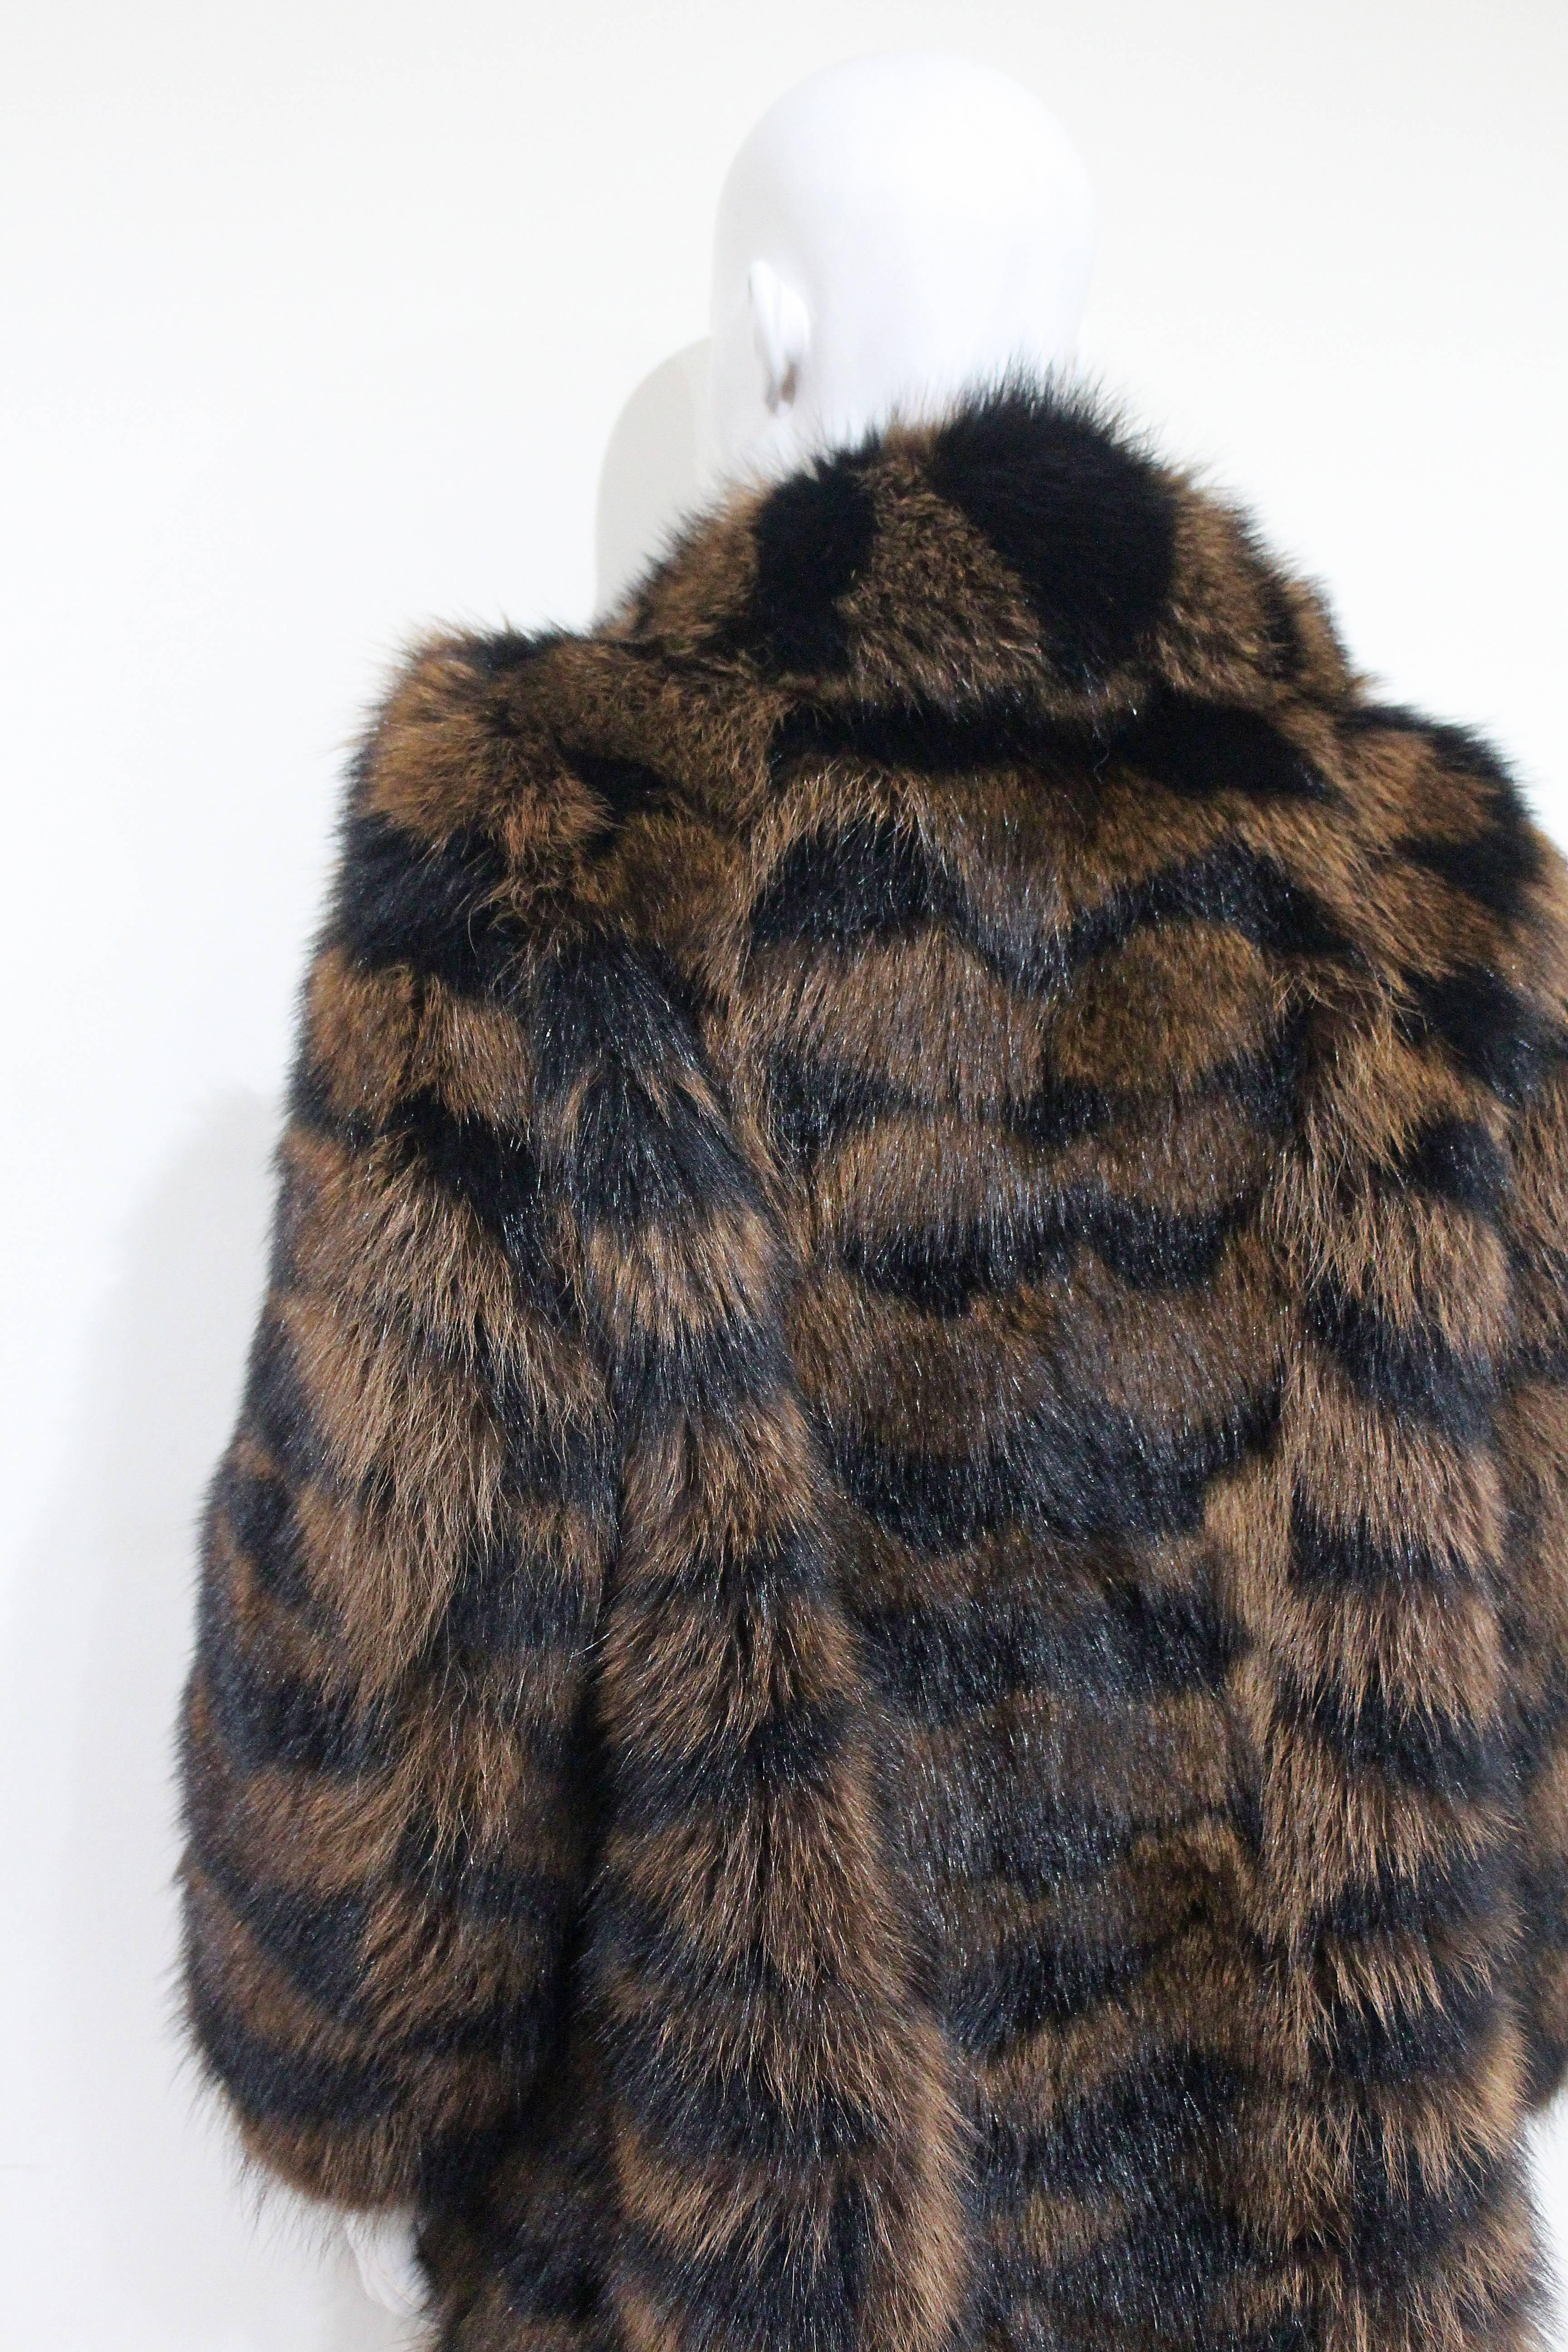 Exceptional Yves Saint Laurent Beaver Fur Coat c. 1980s In New Condition For Sale In London, GB